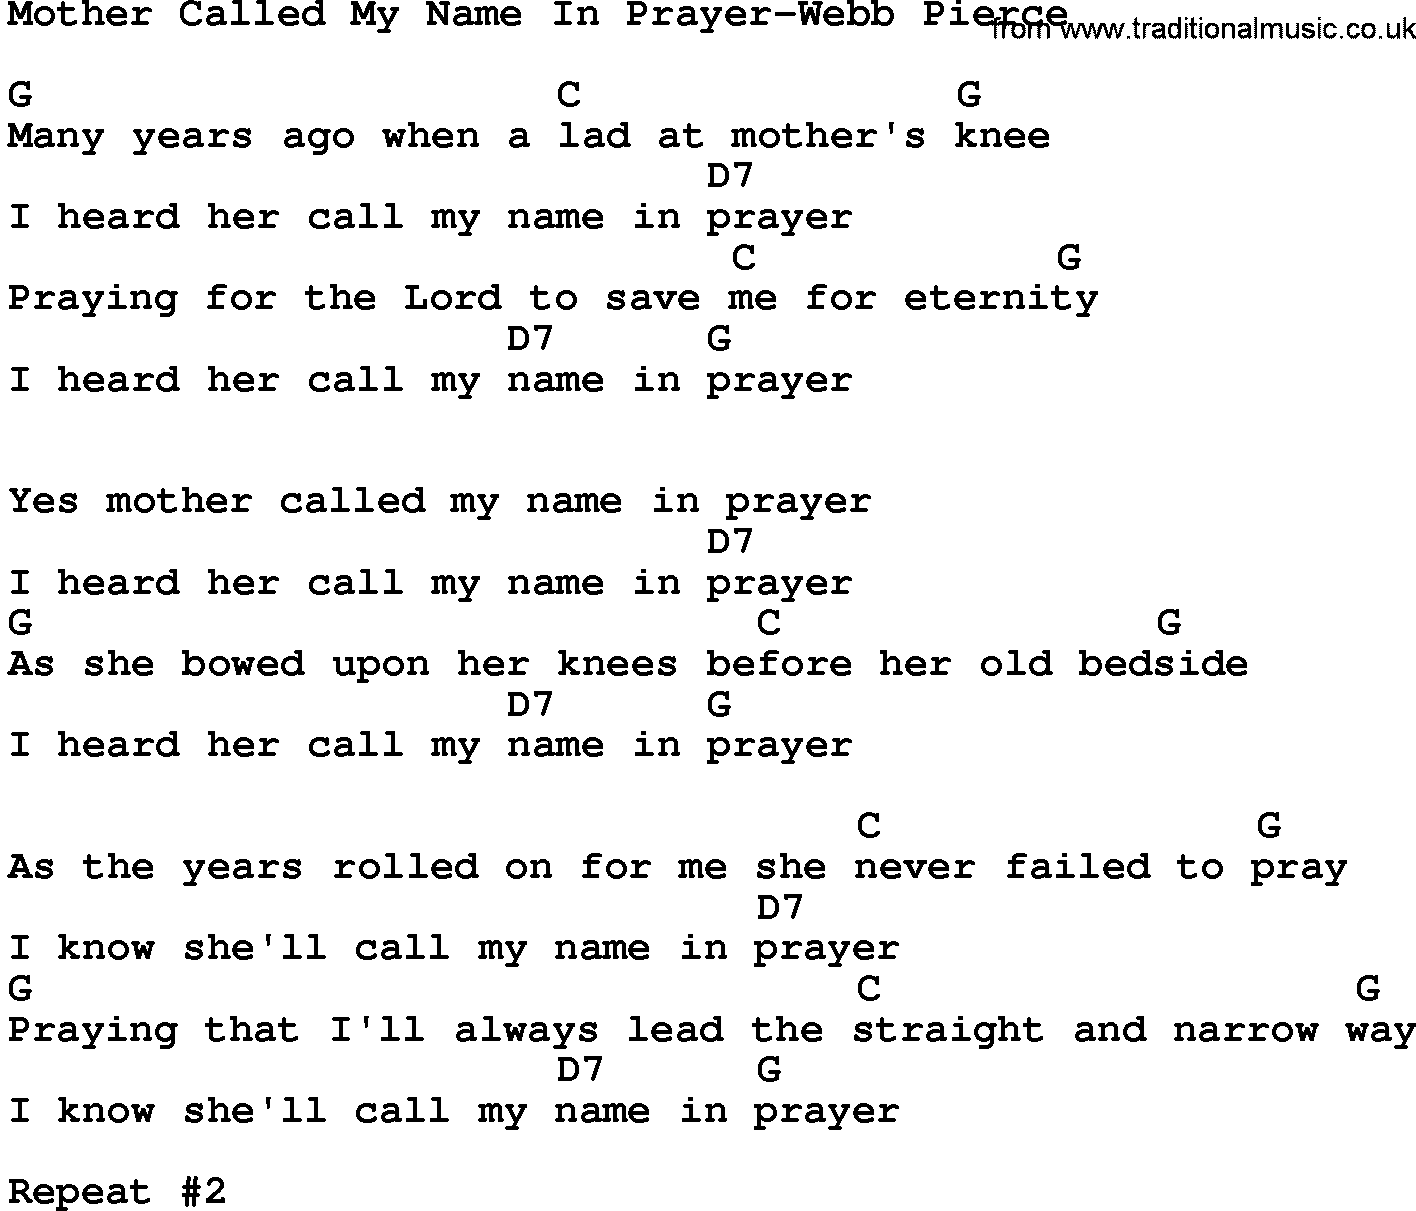 Country music song: Mother Called My Name In Prayer-Webb Pierce lyrics and chords